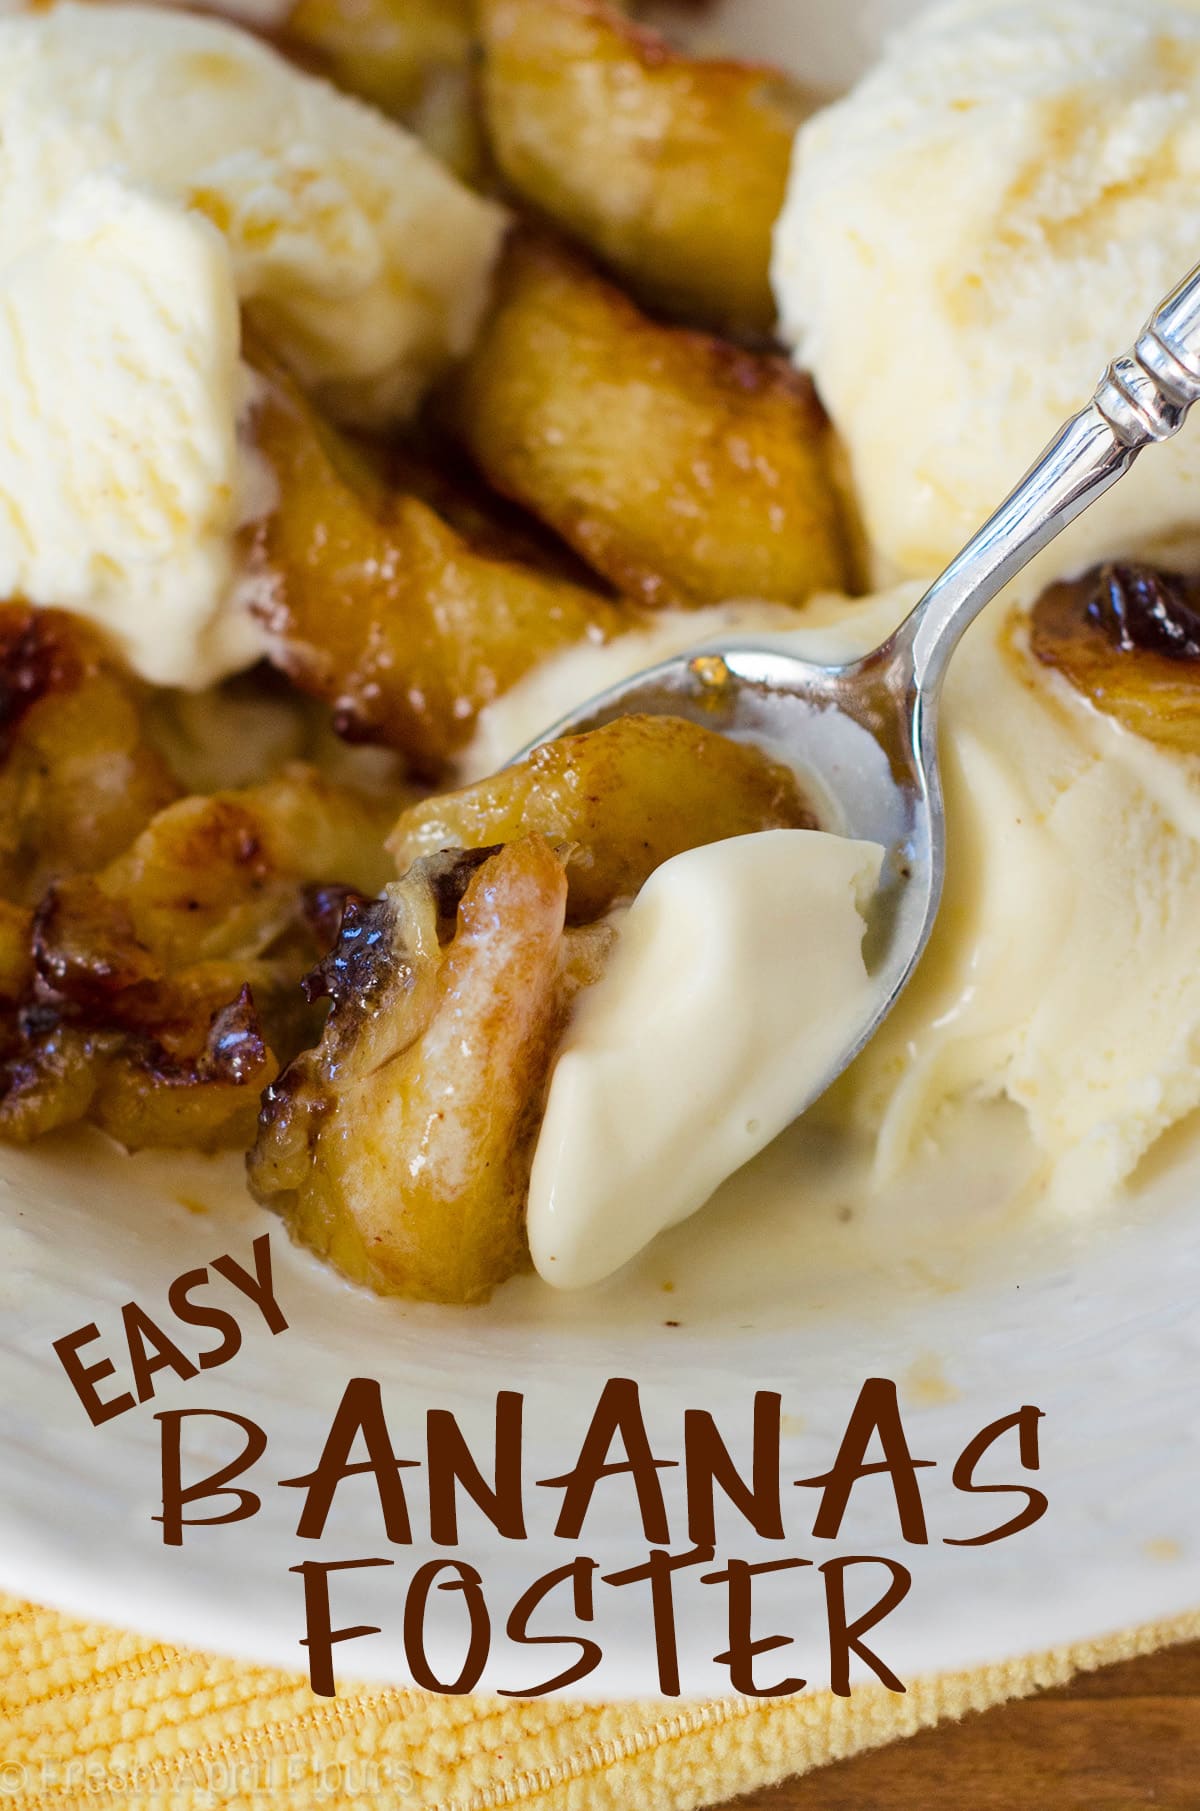 Easy Bananas Foster: A quick and easy recipe for Bananas Foster using collagen peptides and Amaretto liqueur. via @frshaprilflours